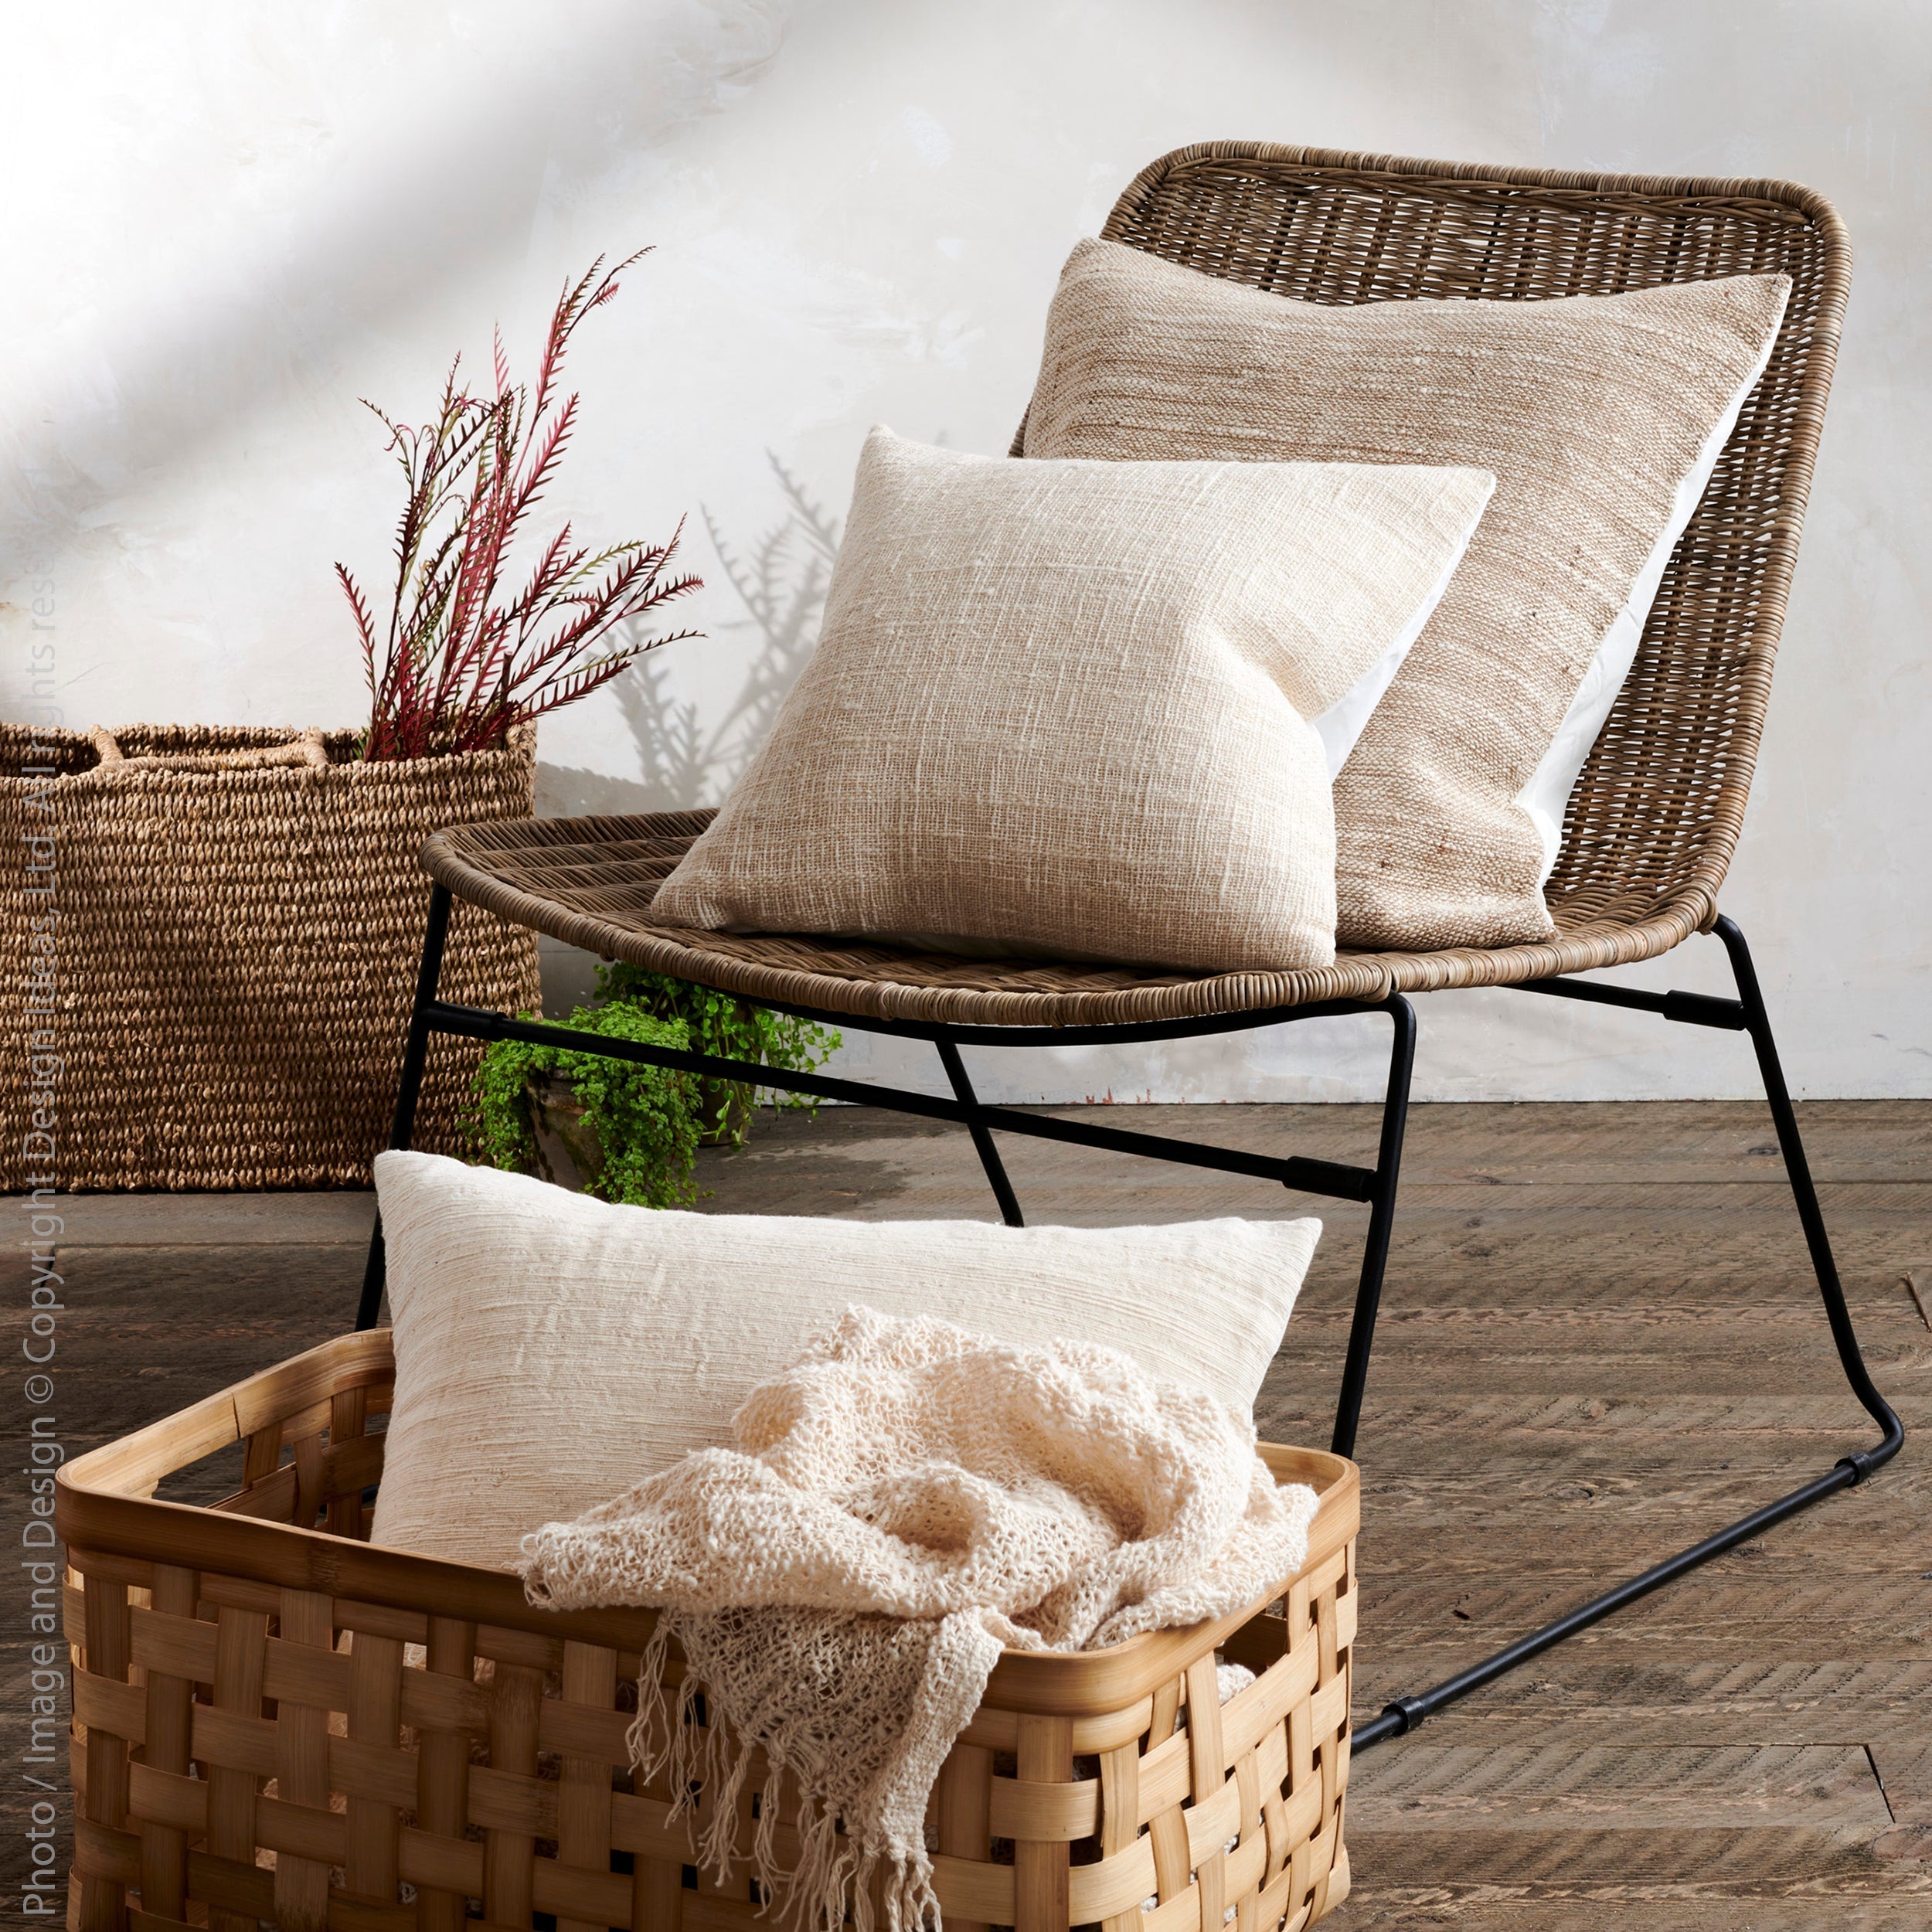 Capri Cotton Throw natural Color | Image 2 | From the Capri Collection | Masterfully assembled with natural cotton for long lasting use | Available in natural color | texxture home